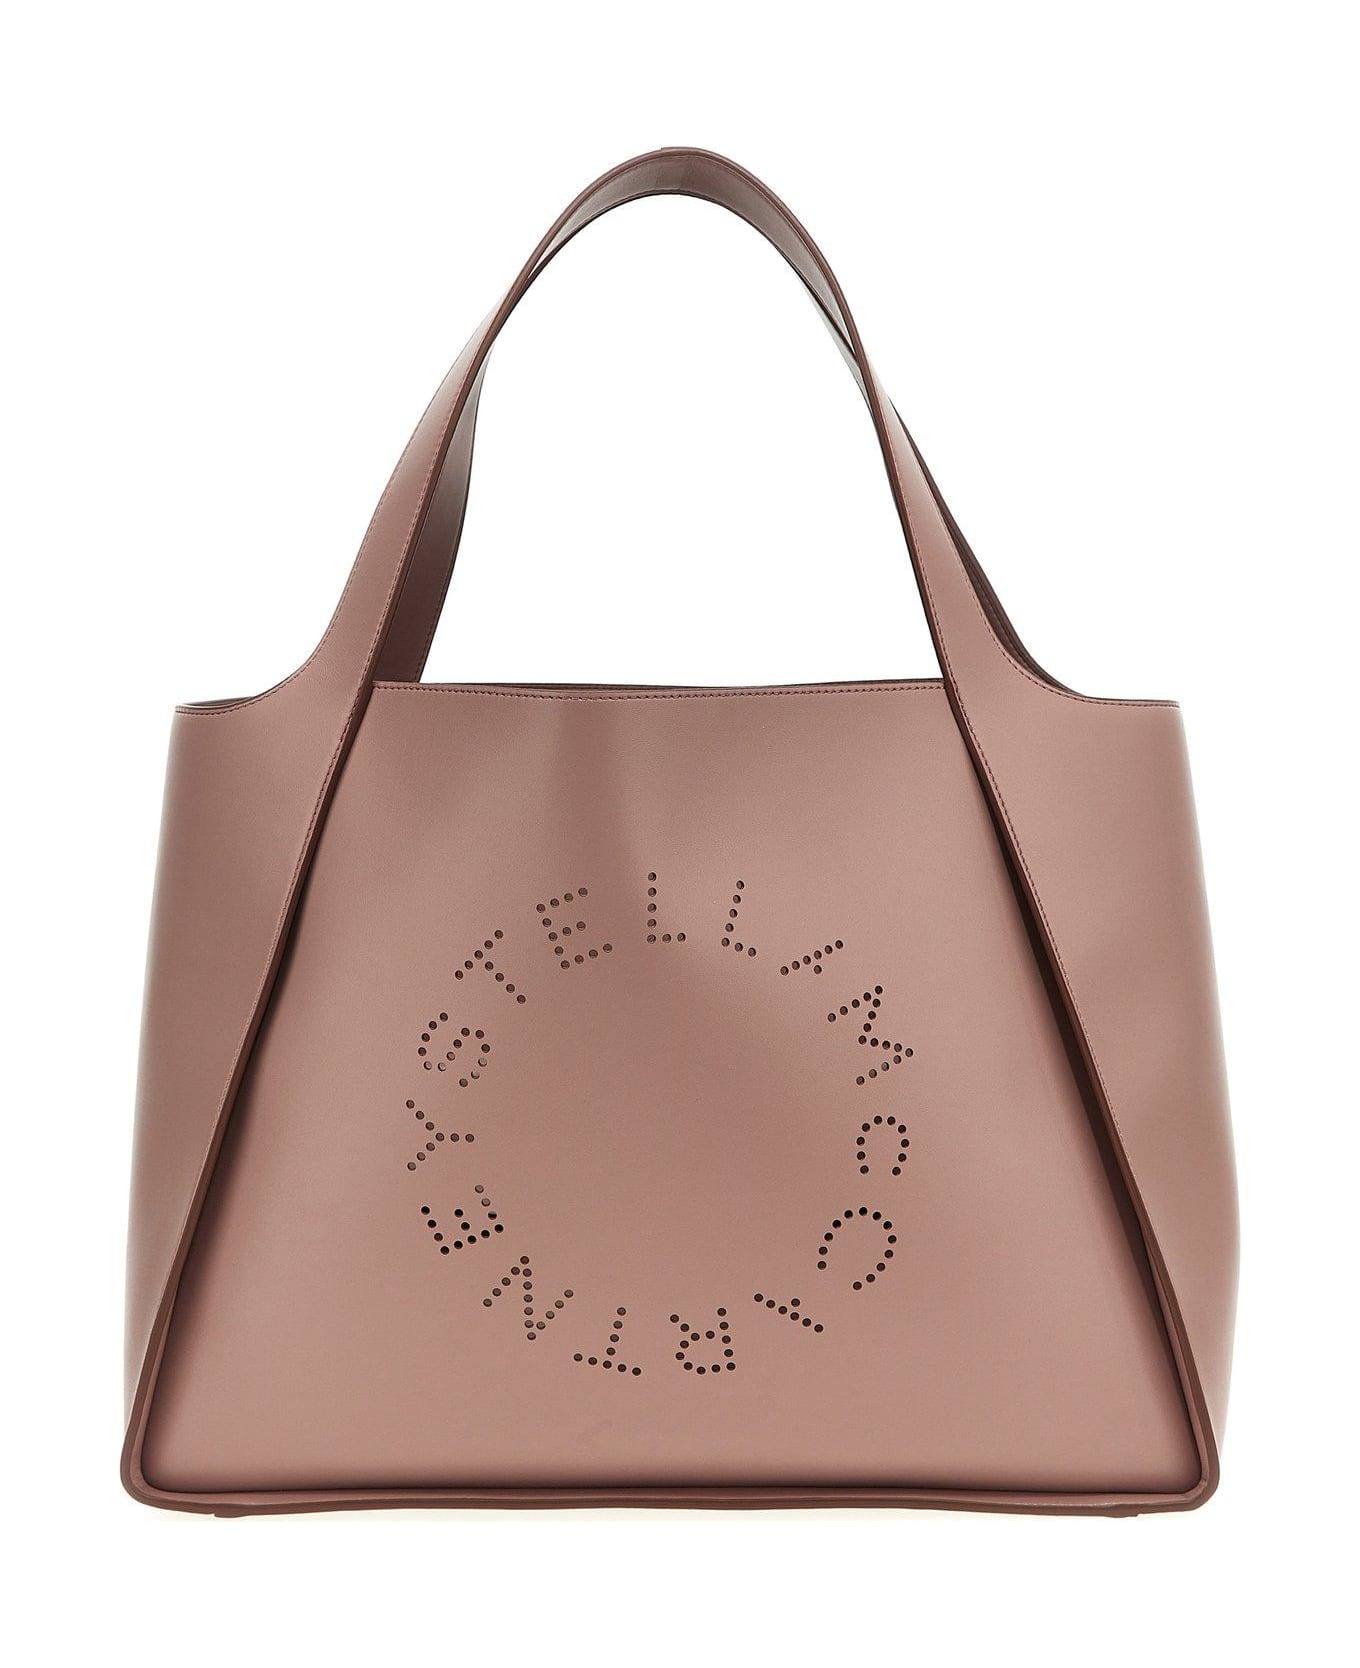 Stella McCartney Logo Perforated Tote Bag - Shell トートバッグ